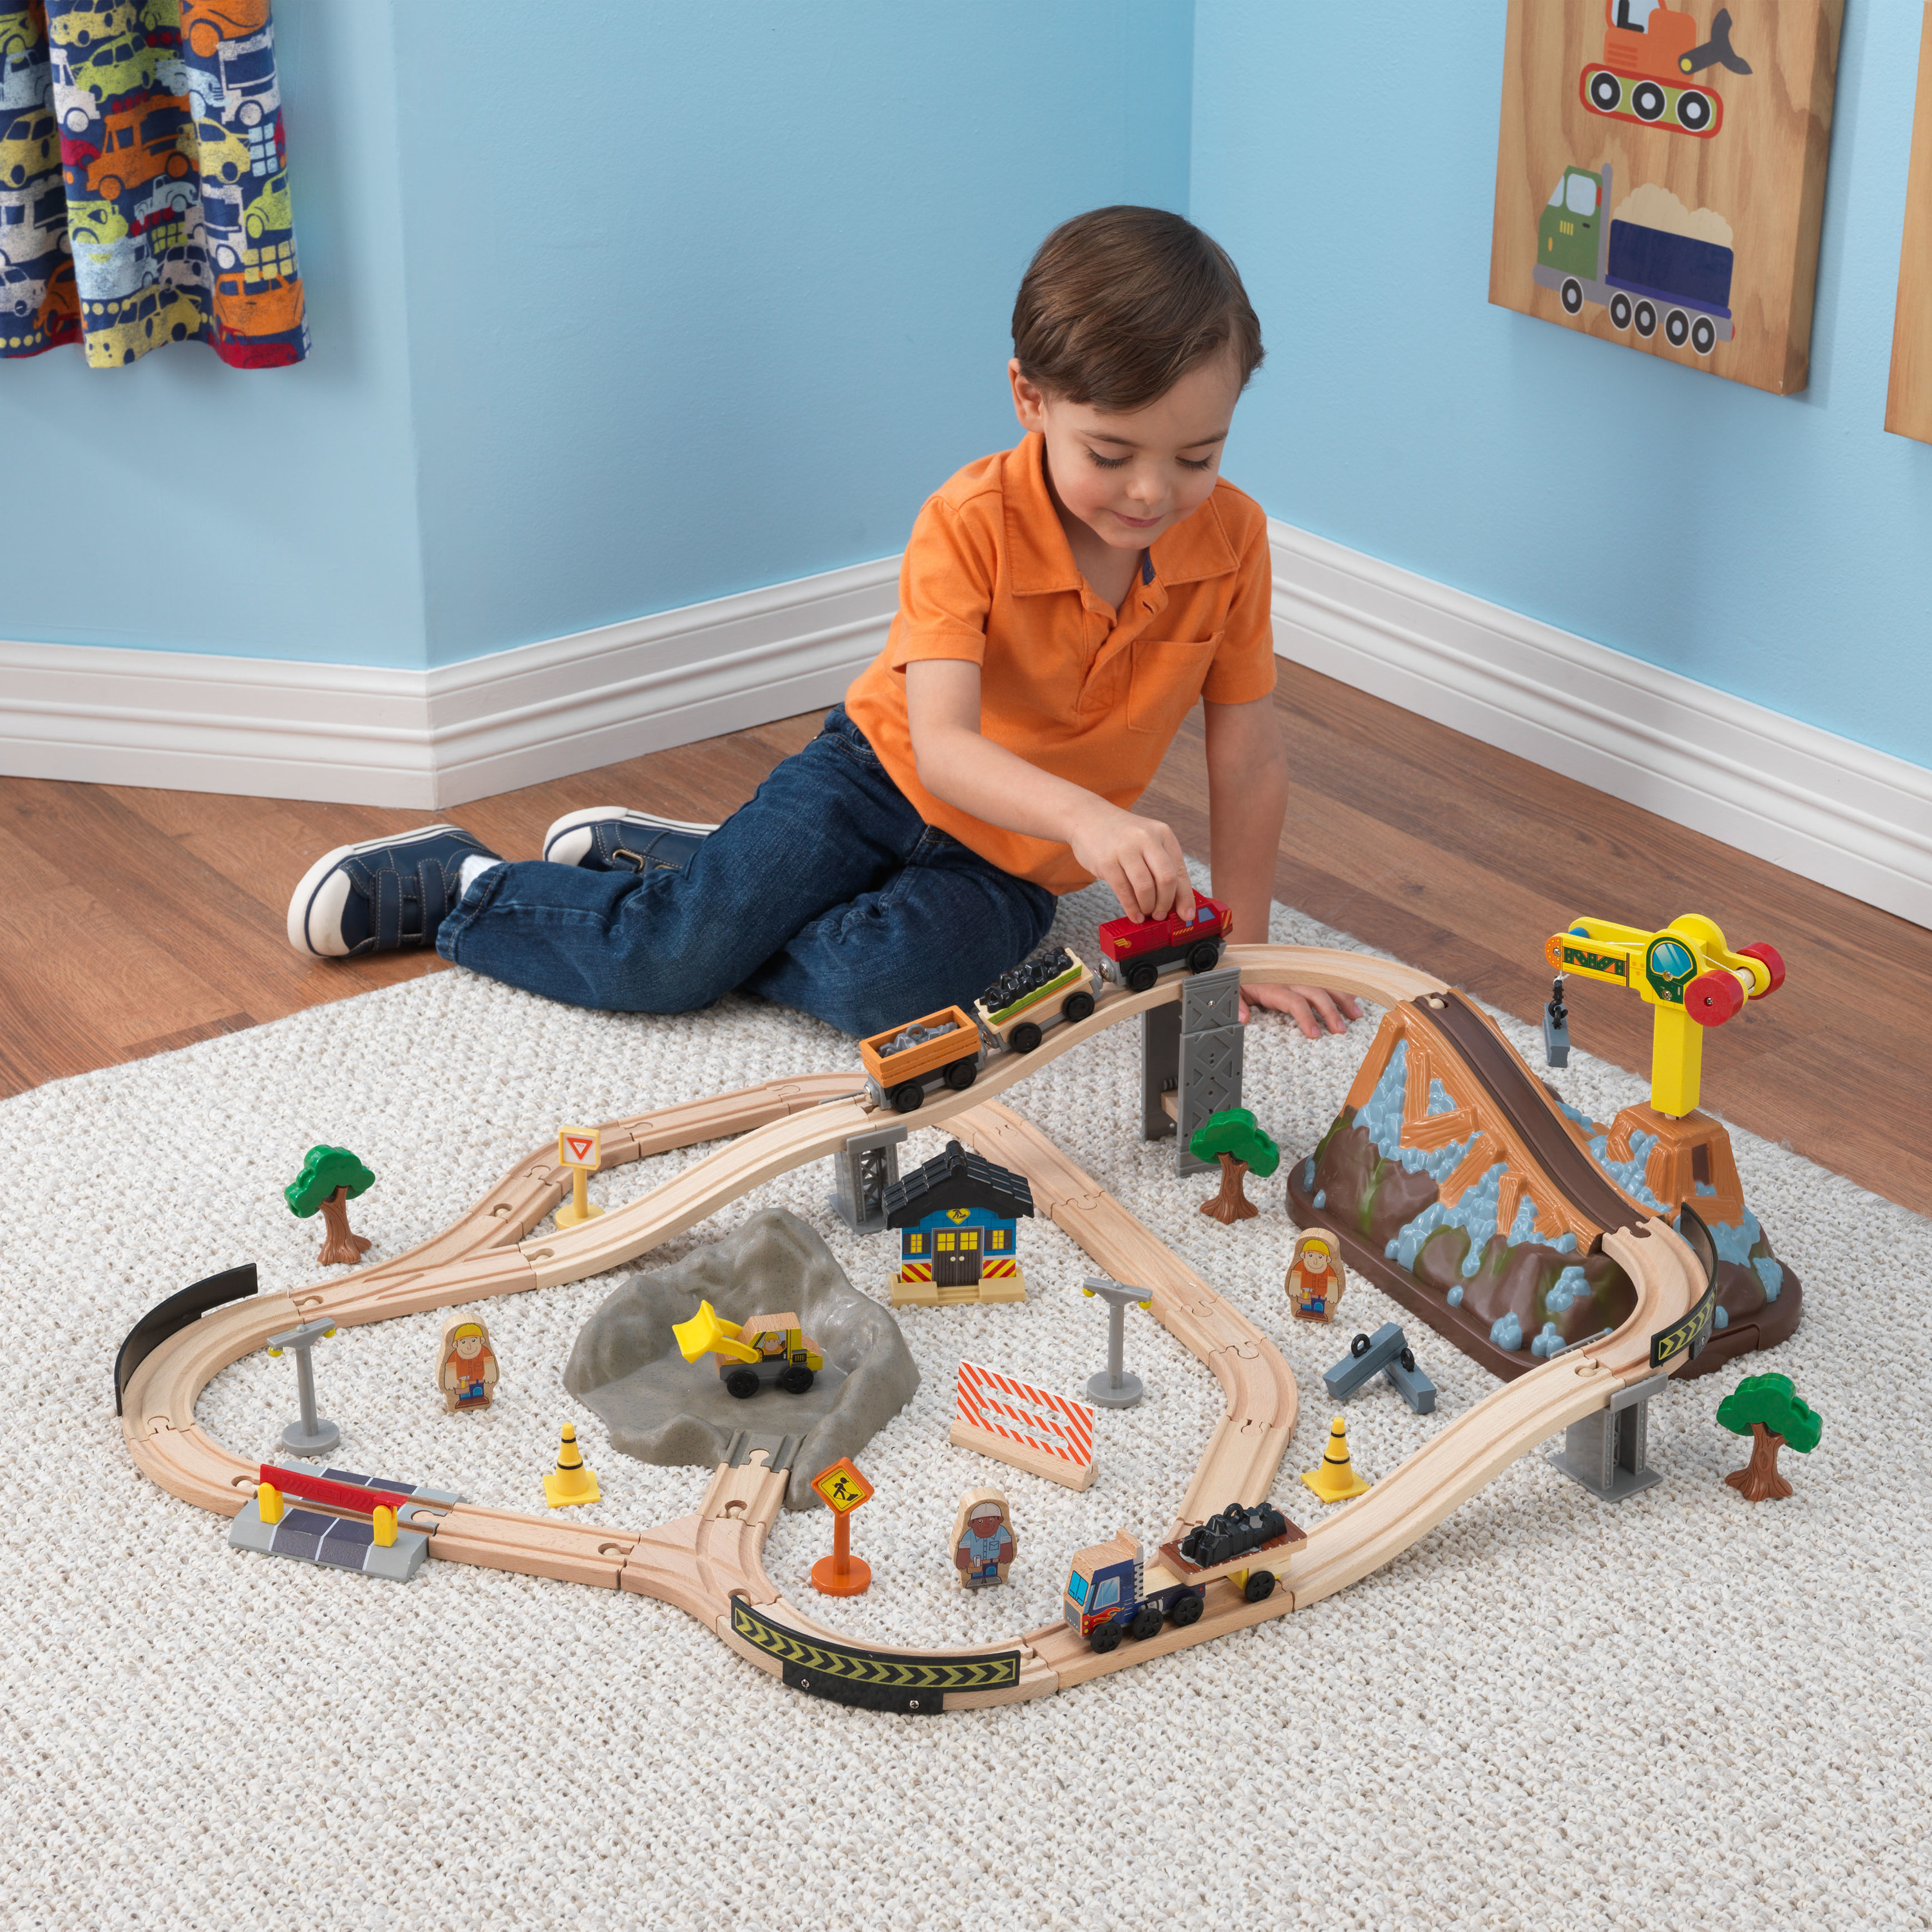 A child playing with the train set